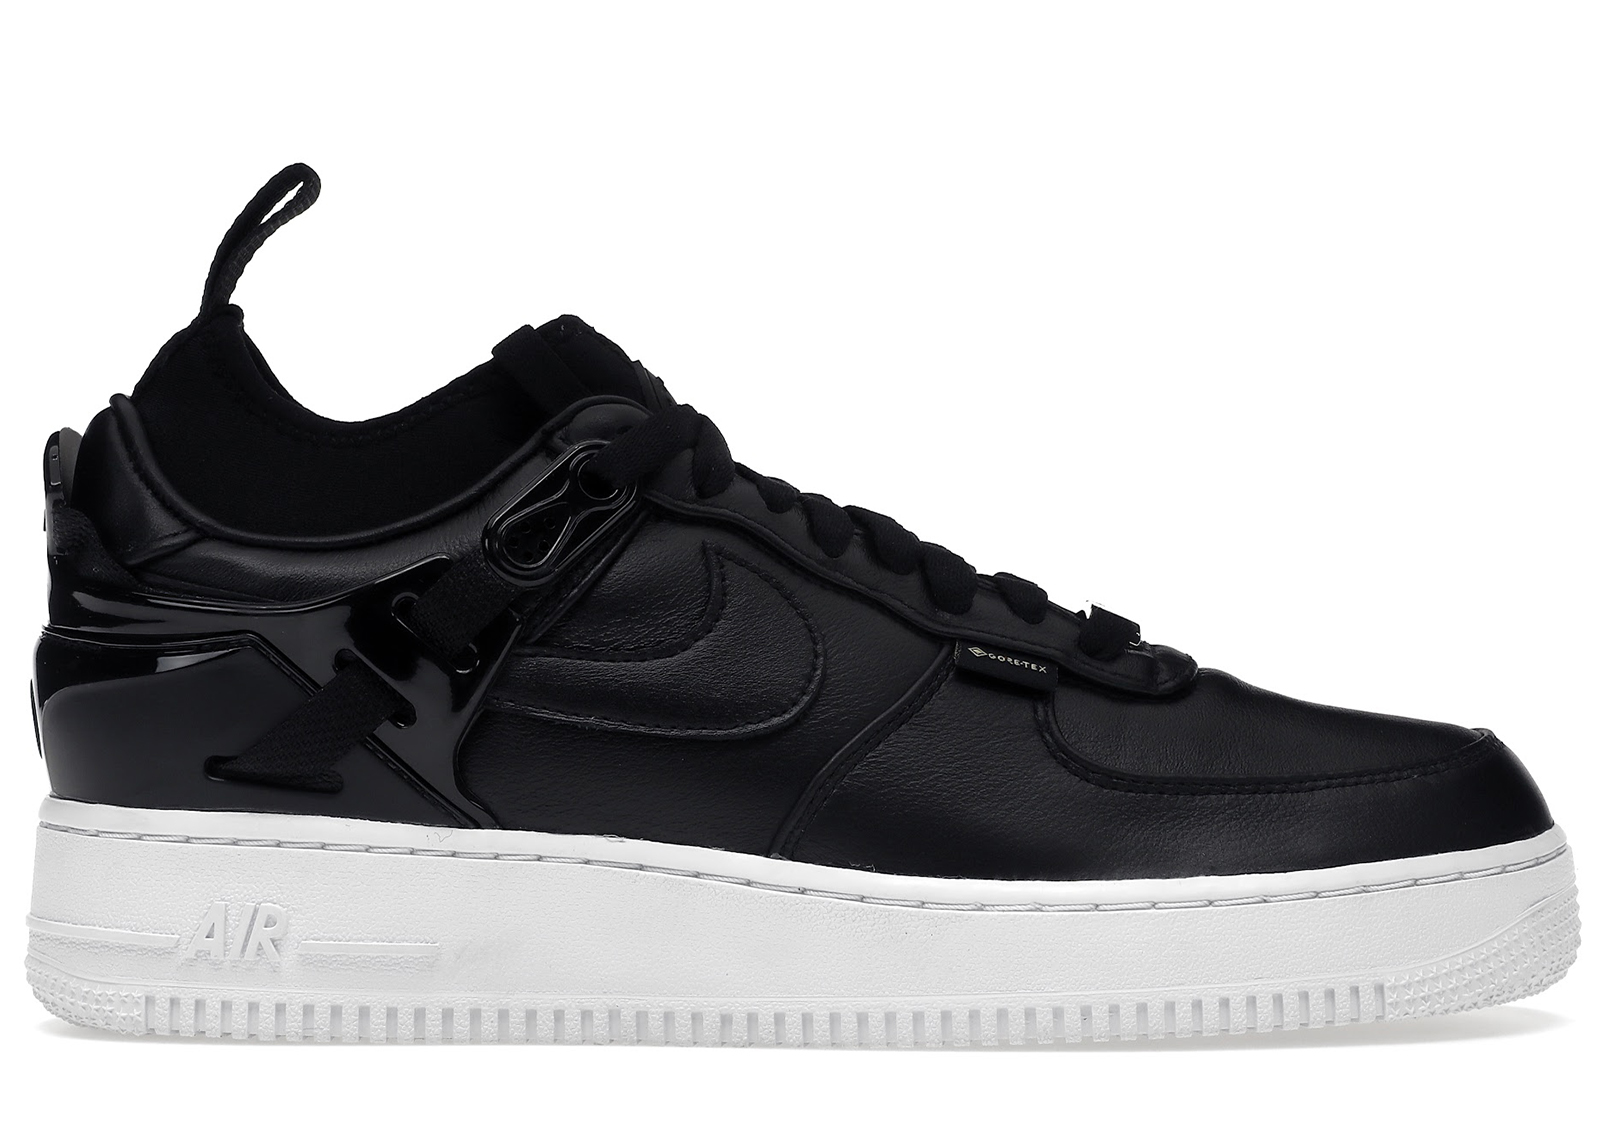 NIKE x UNDERCOVER AIR FORCE 1 LOW